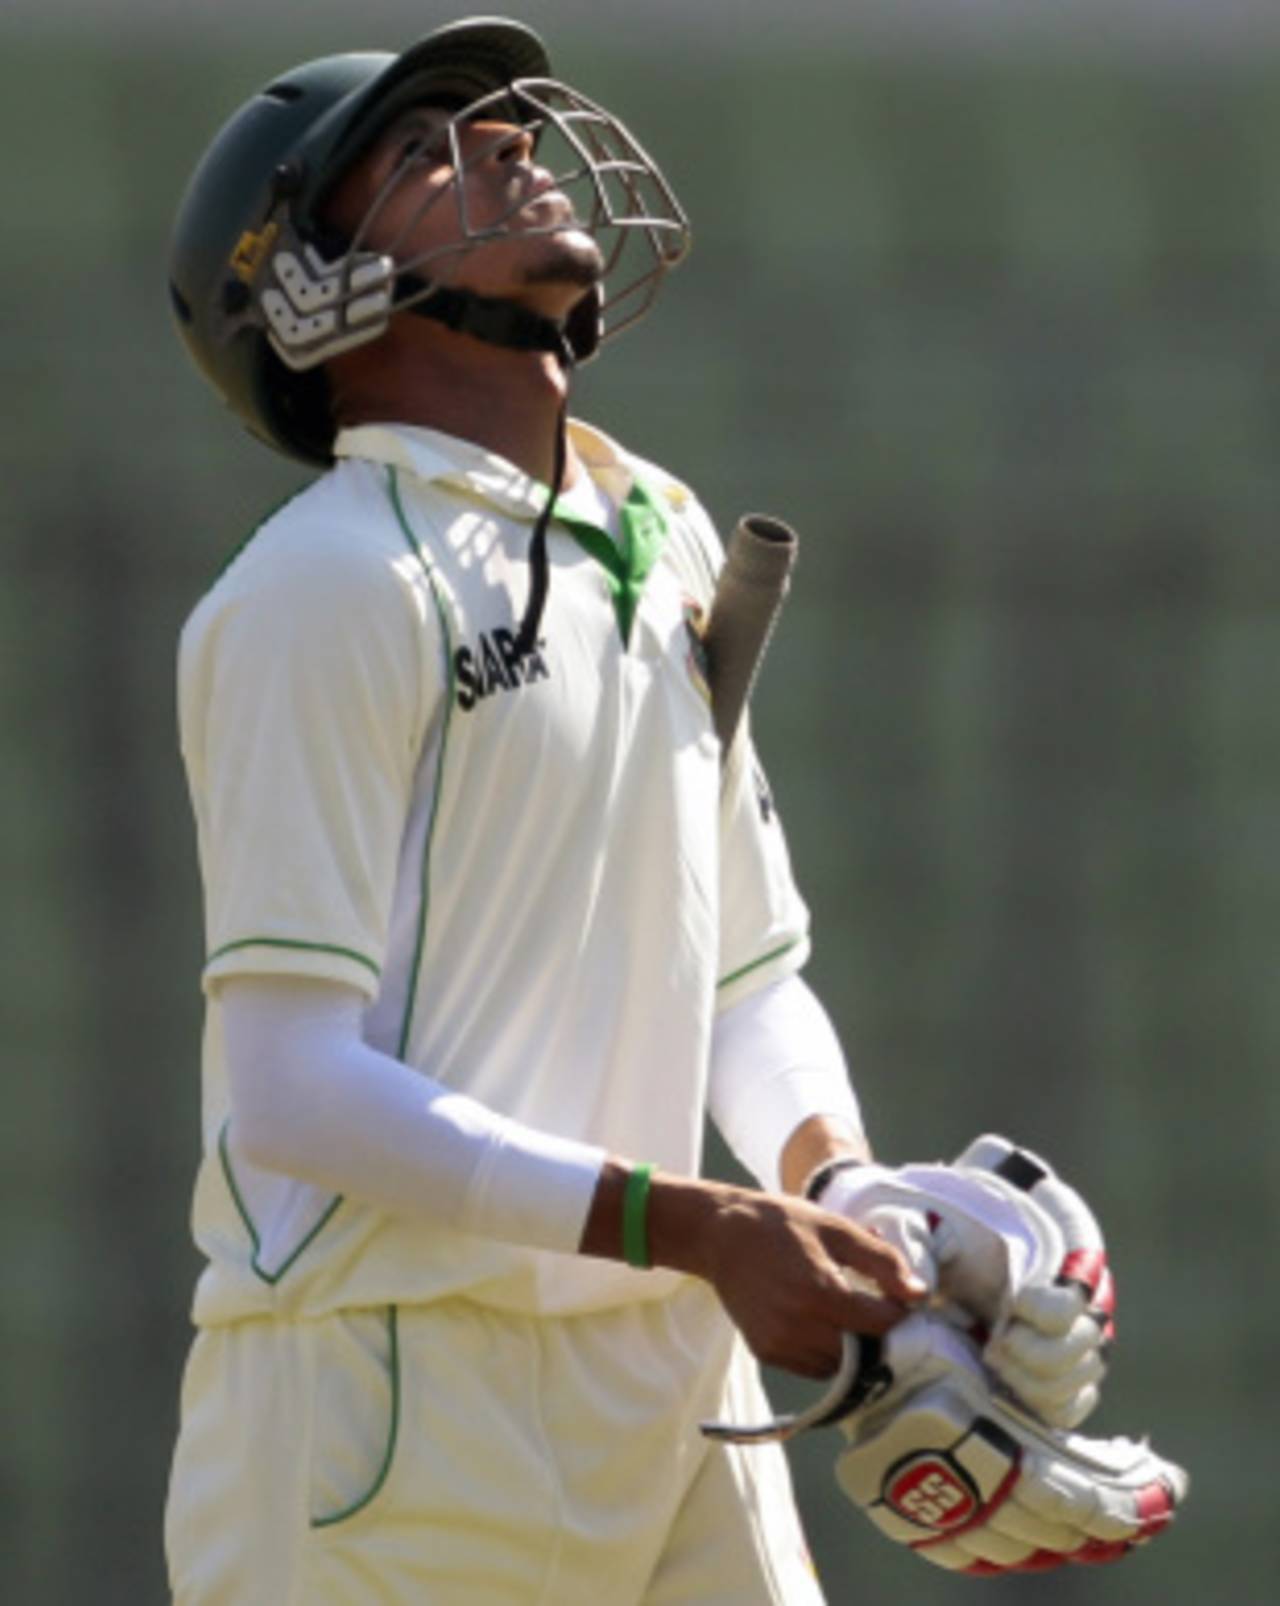 A disappointed Nasir Hossain didn't get reach his maiden Test century, which he says he would have celebrated in a manner that would have "stunned everyone"&nbsp;&nbsp;&bull;&nbsp;&nbsp;Associated Press